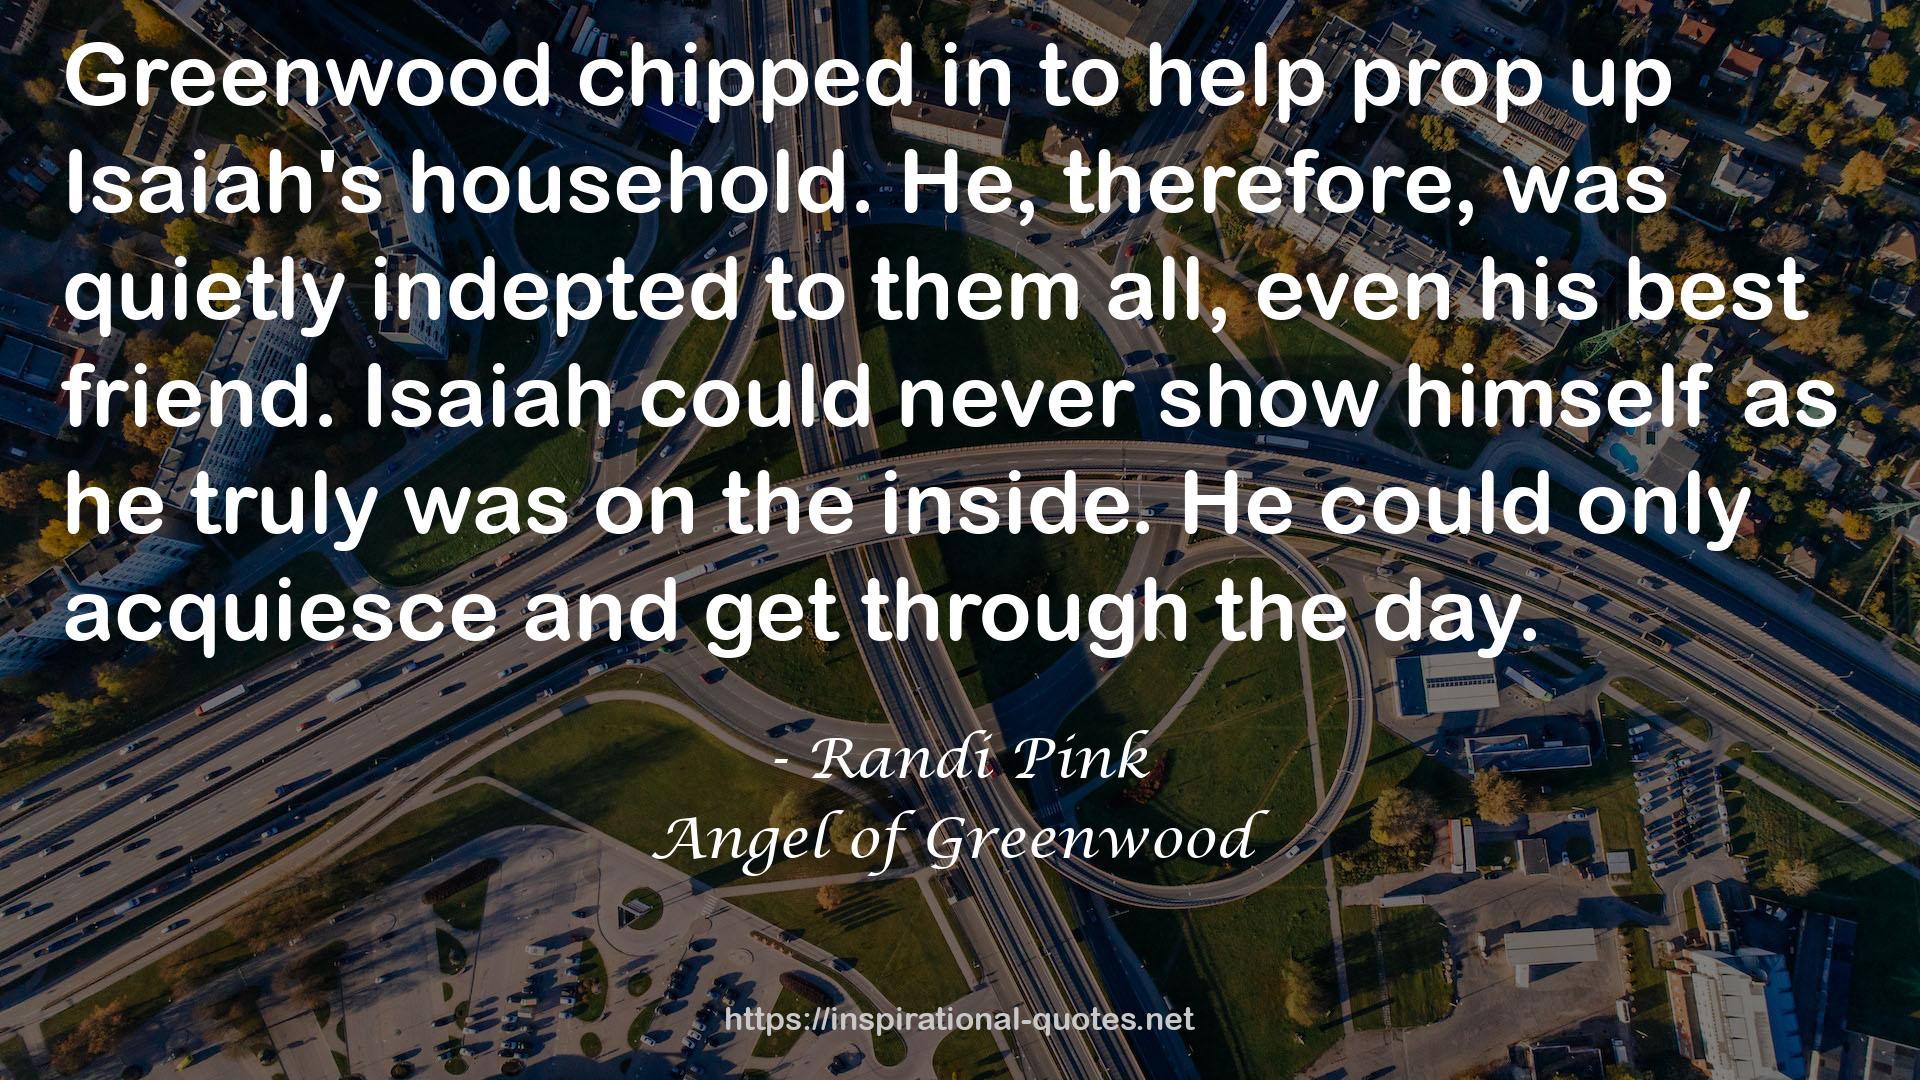 Angel of Greenwood QUOTES